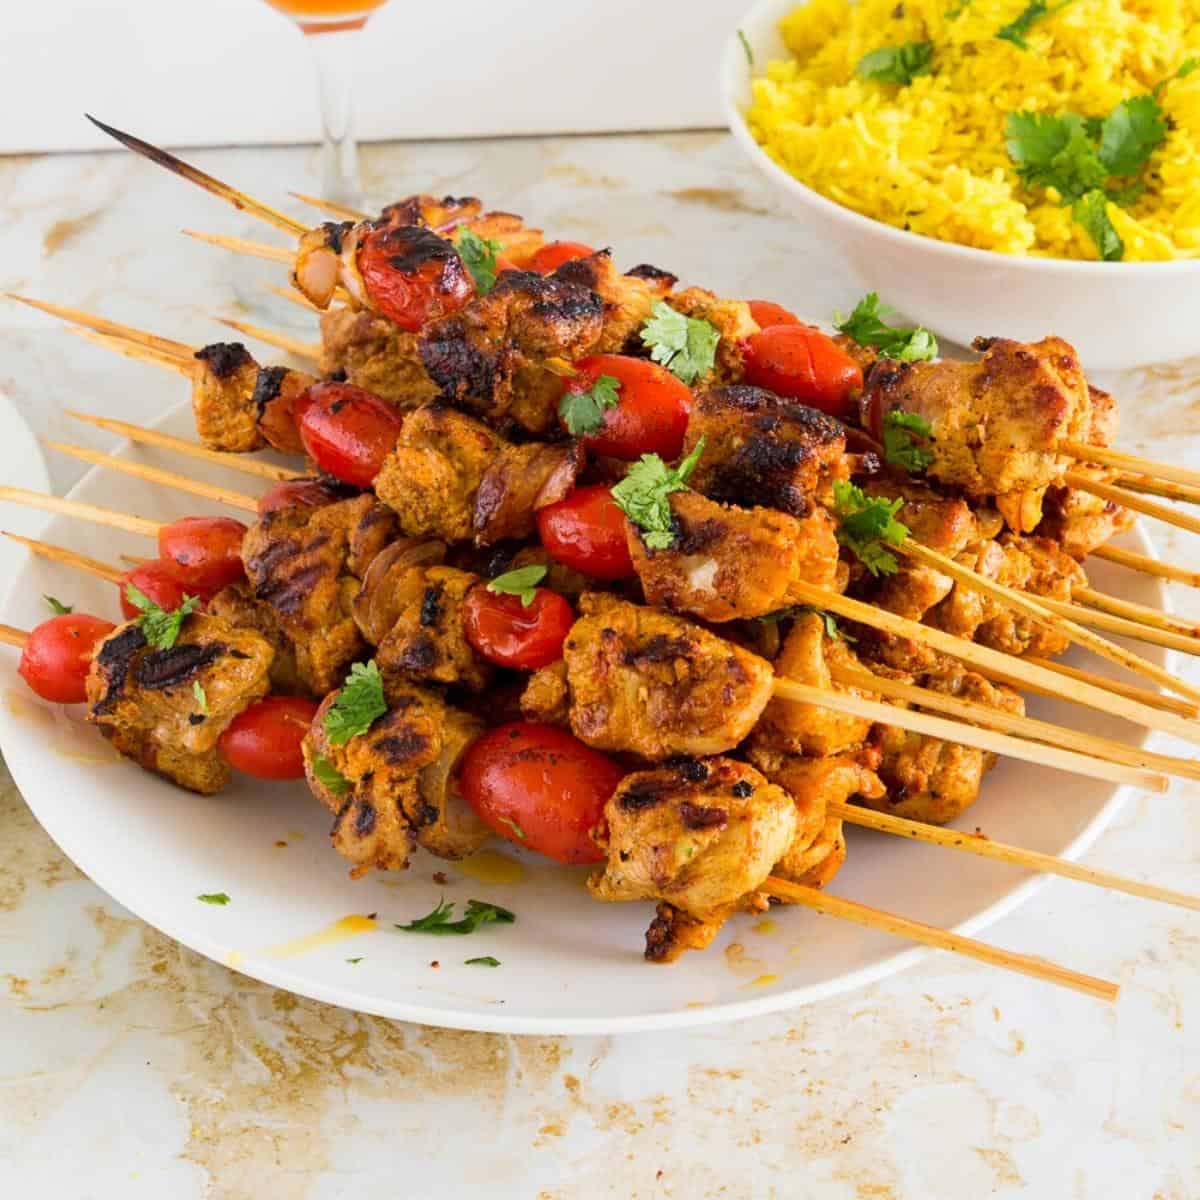 Chicken kebabs on a plate besides turmeric rice.